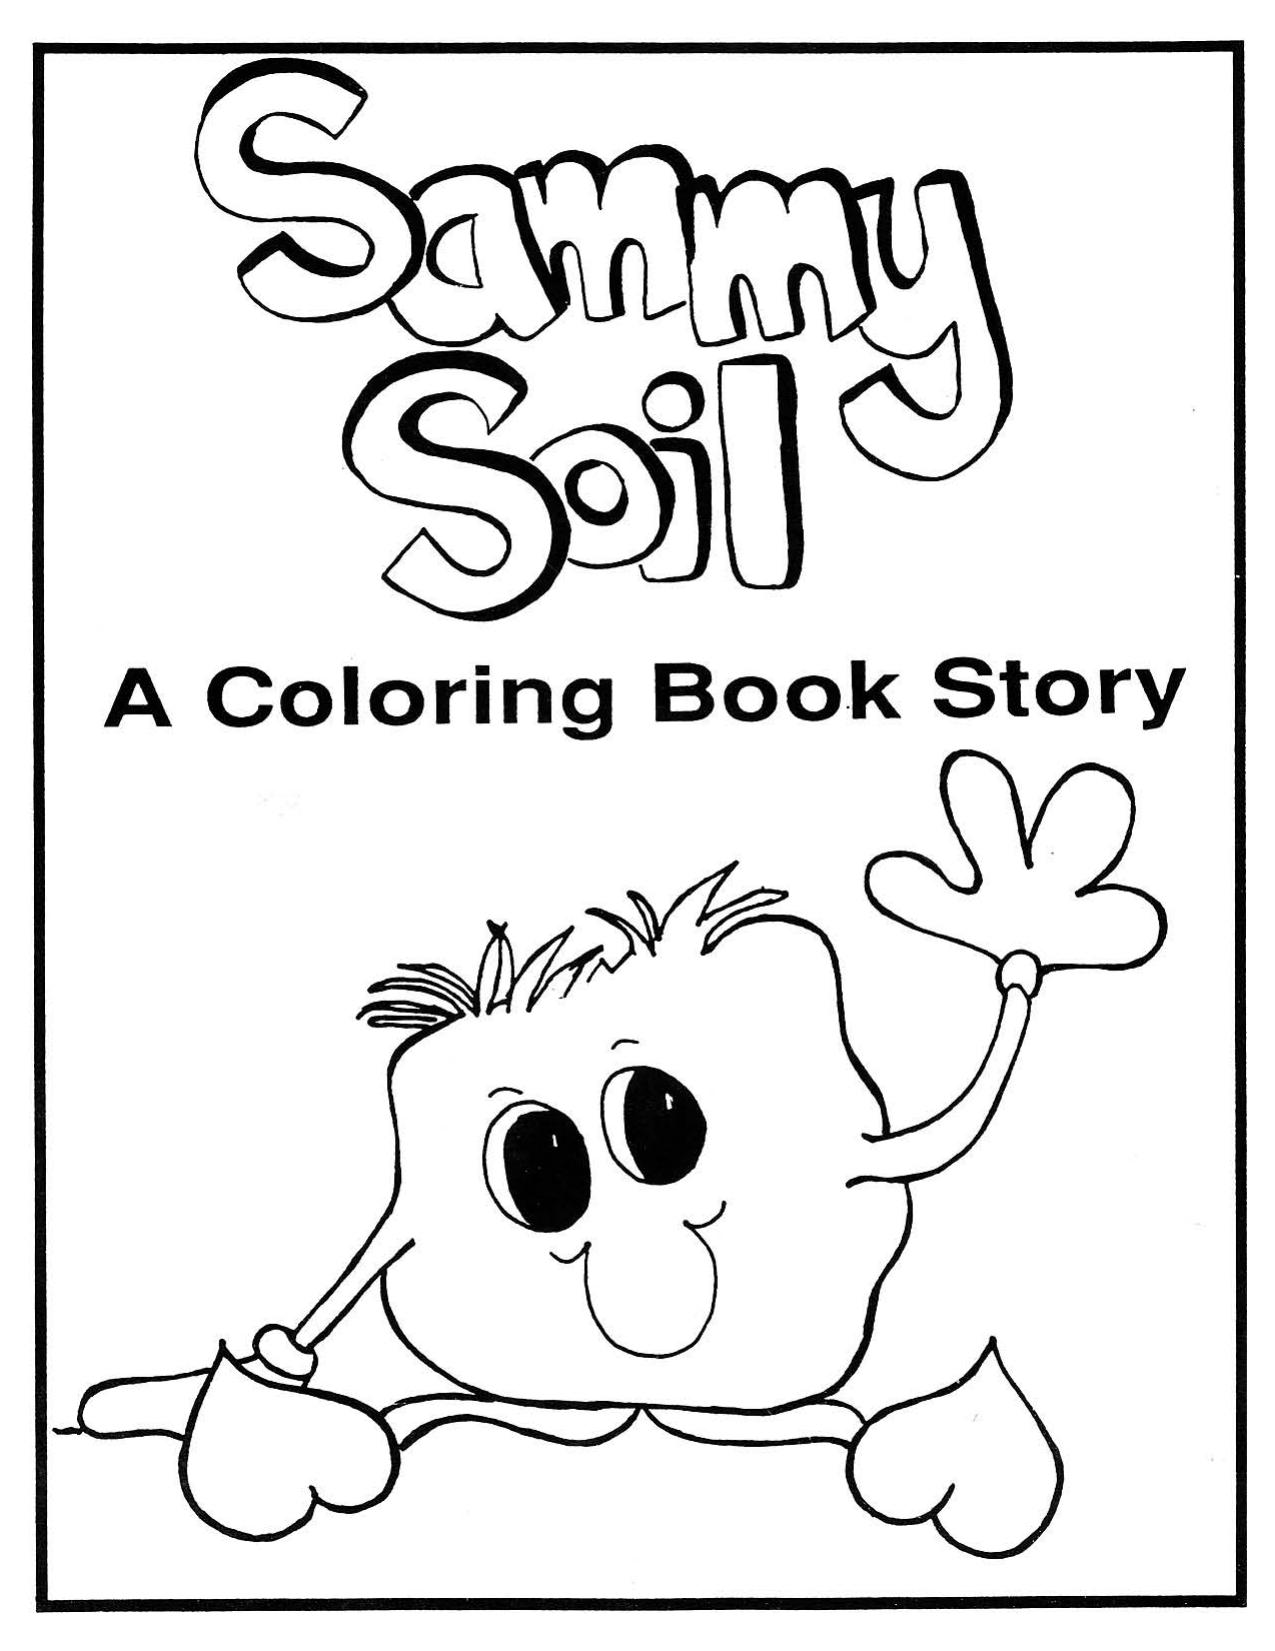 Sammy Soil, A Coloring Book Story